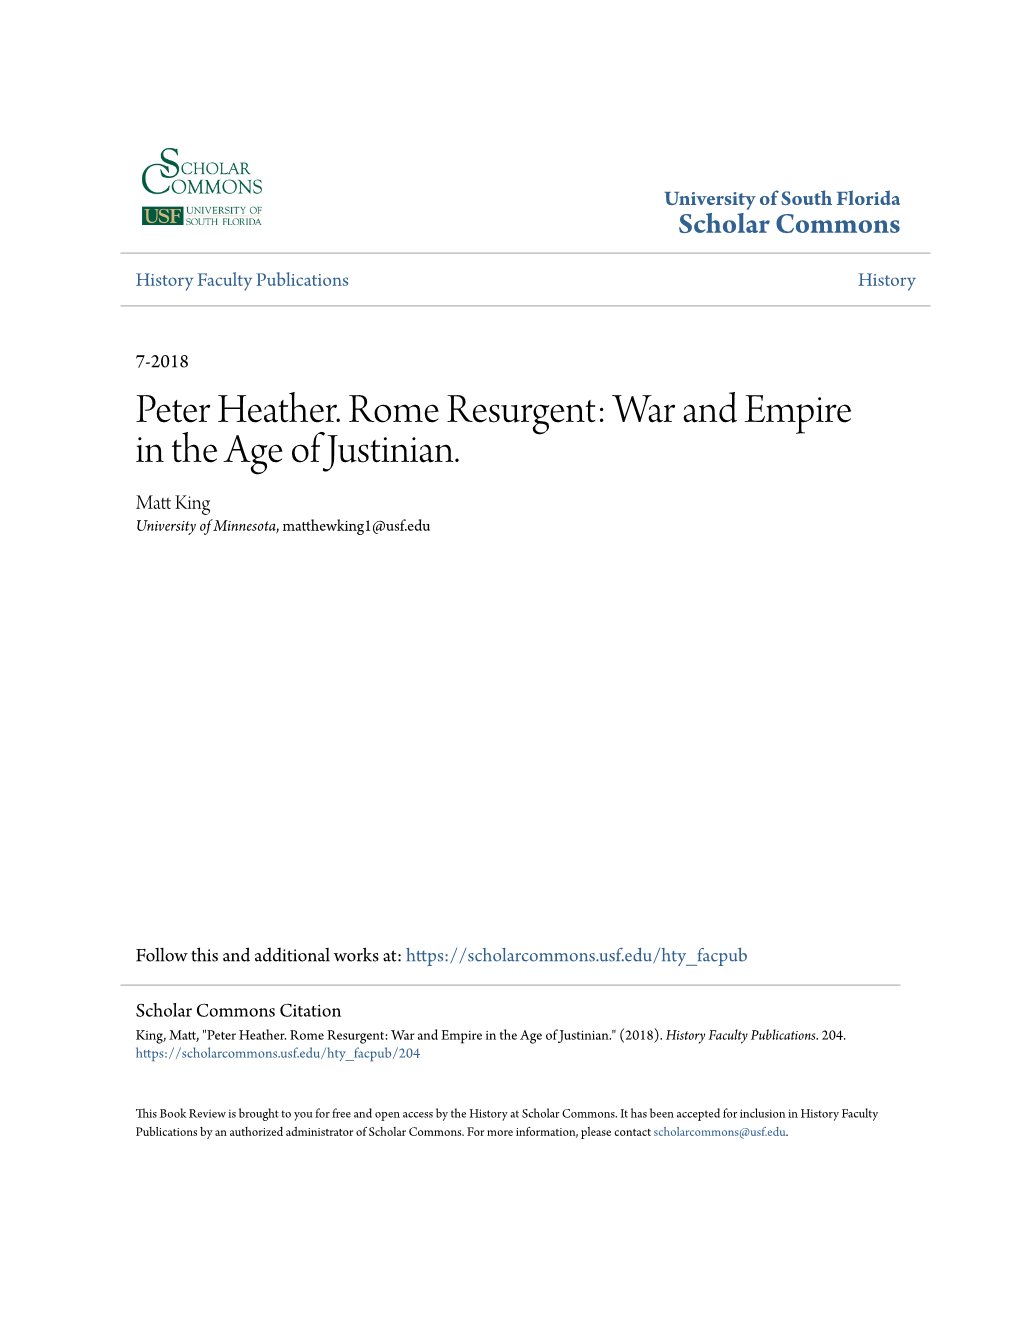 Peter Heather. Rome Resurgent: War and Empire in the Age of Justinian